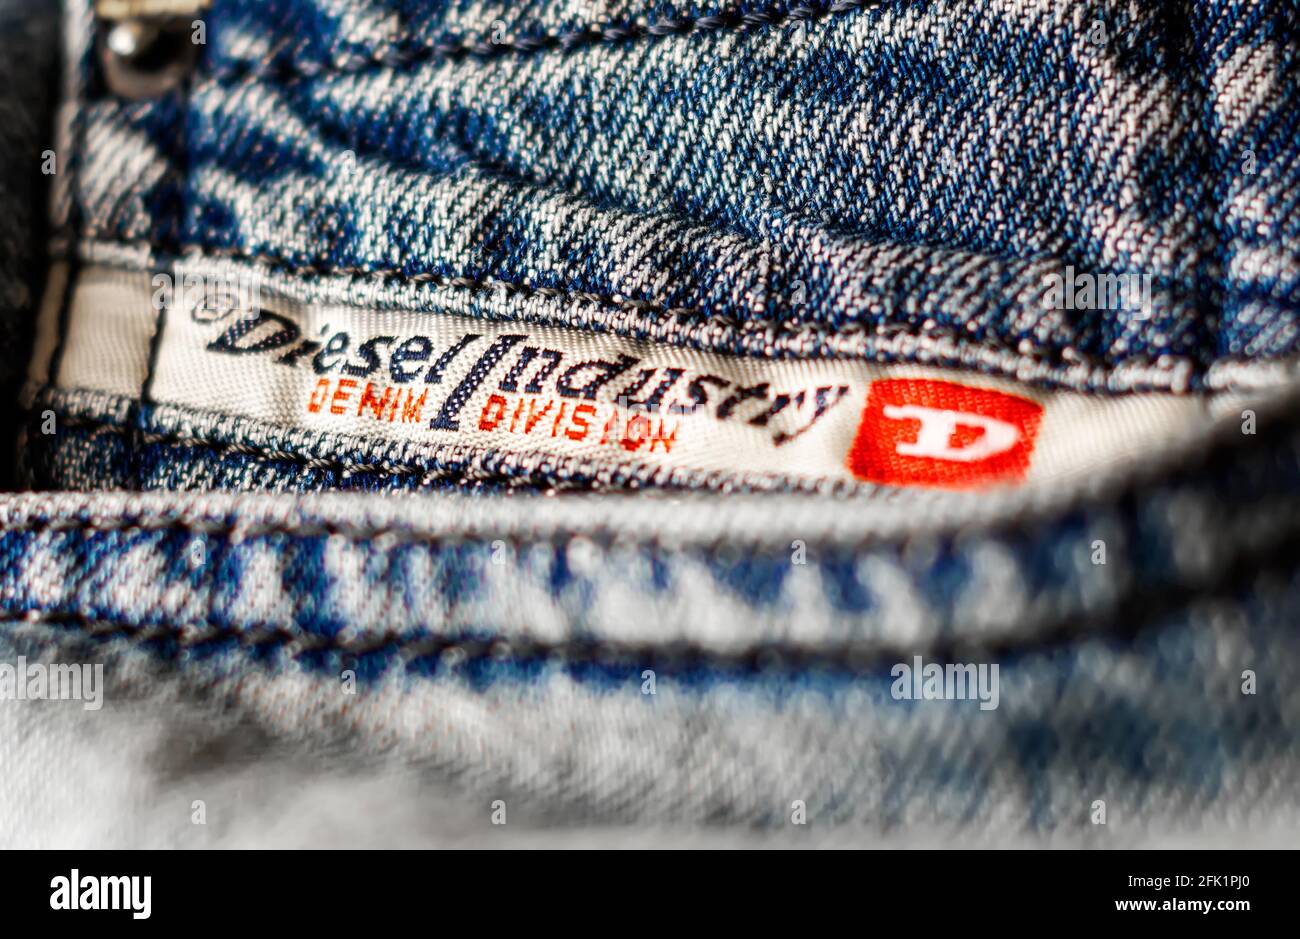 Diesel jeans hi-res stock photography and images - Alamy